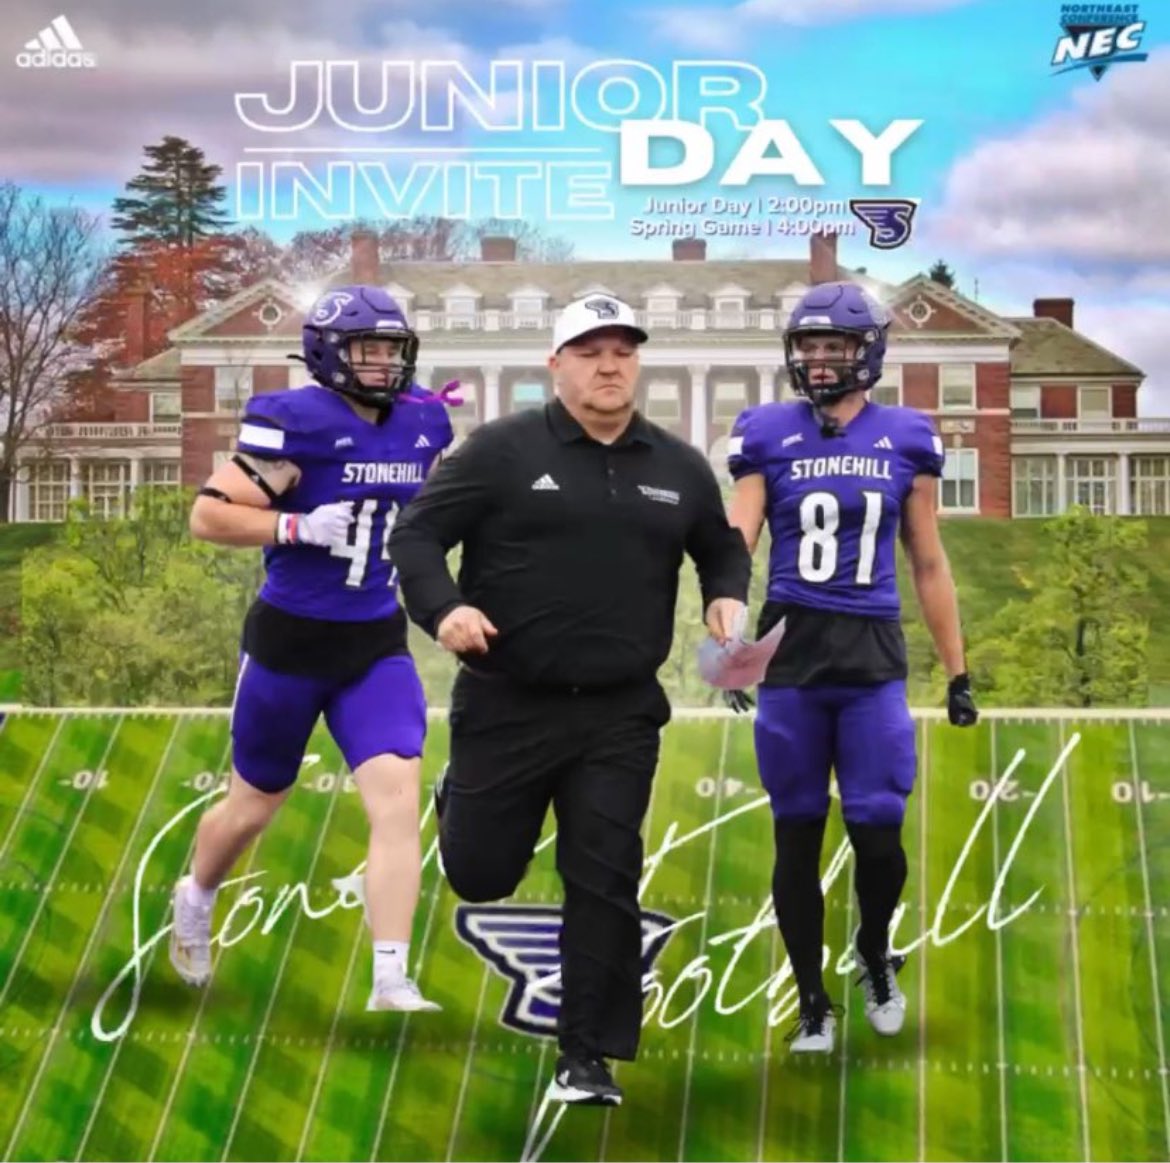 Big thanks to @CoachRandol for the Junior Day/Spring Game invite! I’m looking forward to being on campus in the future and learning more about Stonehill Football! @CoachSchuman @mfarrellsports @RichSeubert69 @CoachAsco @EQBcoach @CoachDNuCSports